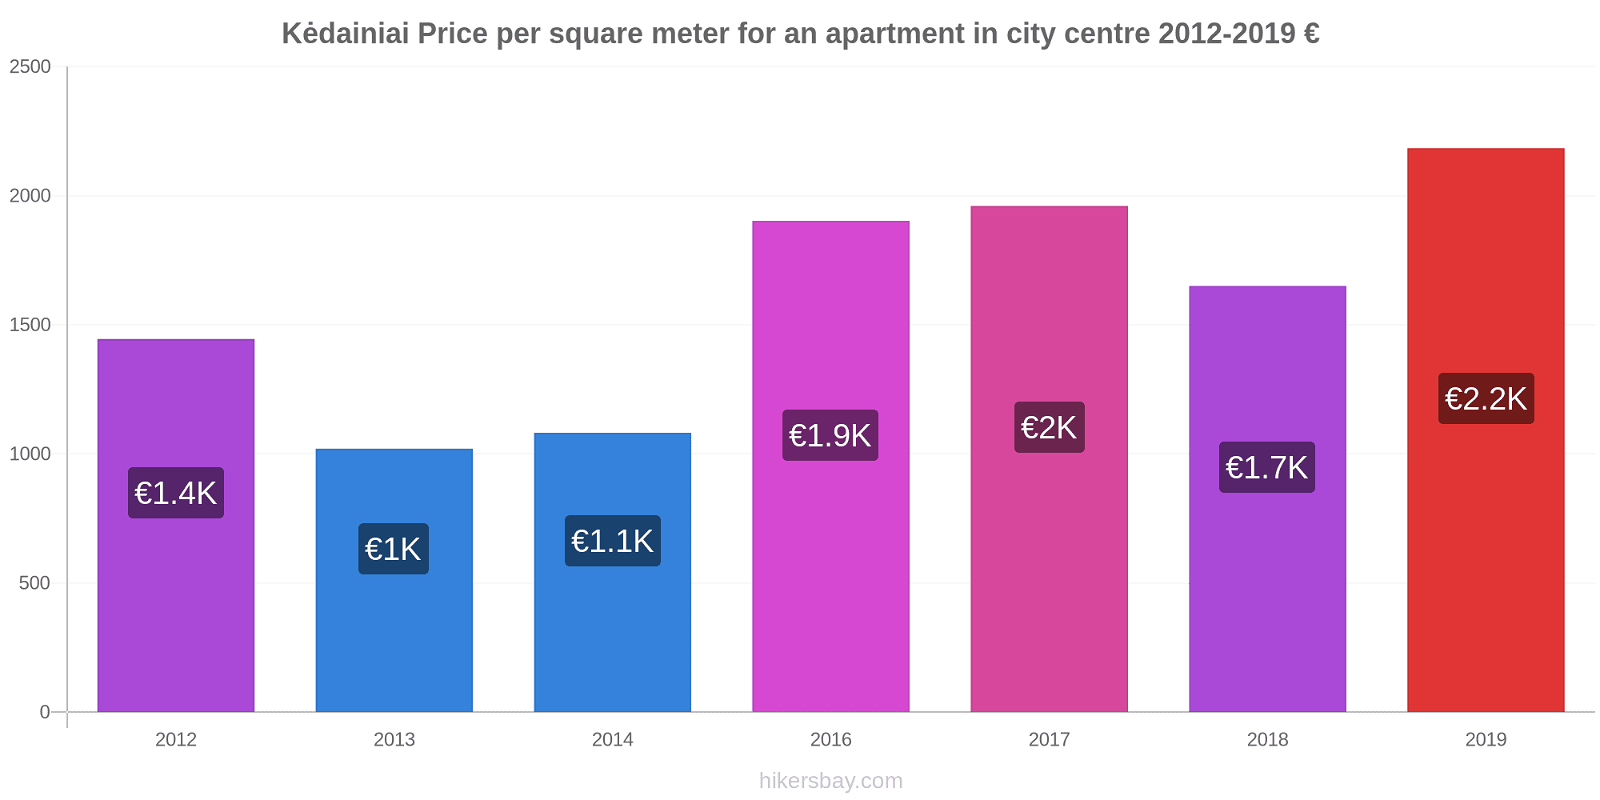 Kėdainiai price changes Price per square meter for an apartment in city centre hikersbay.com